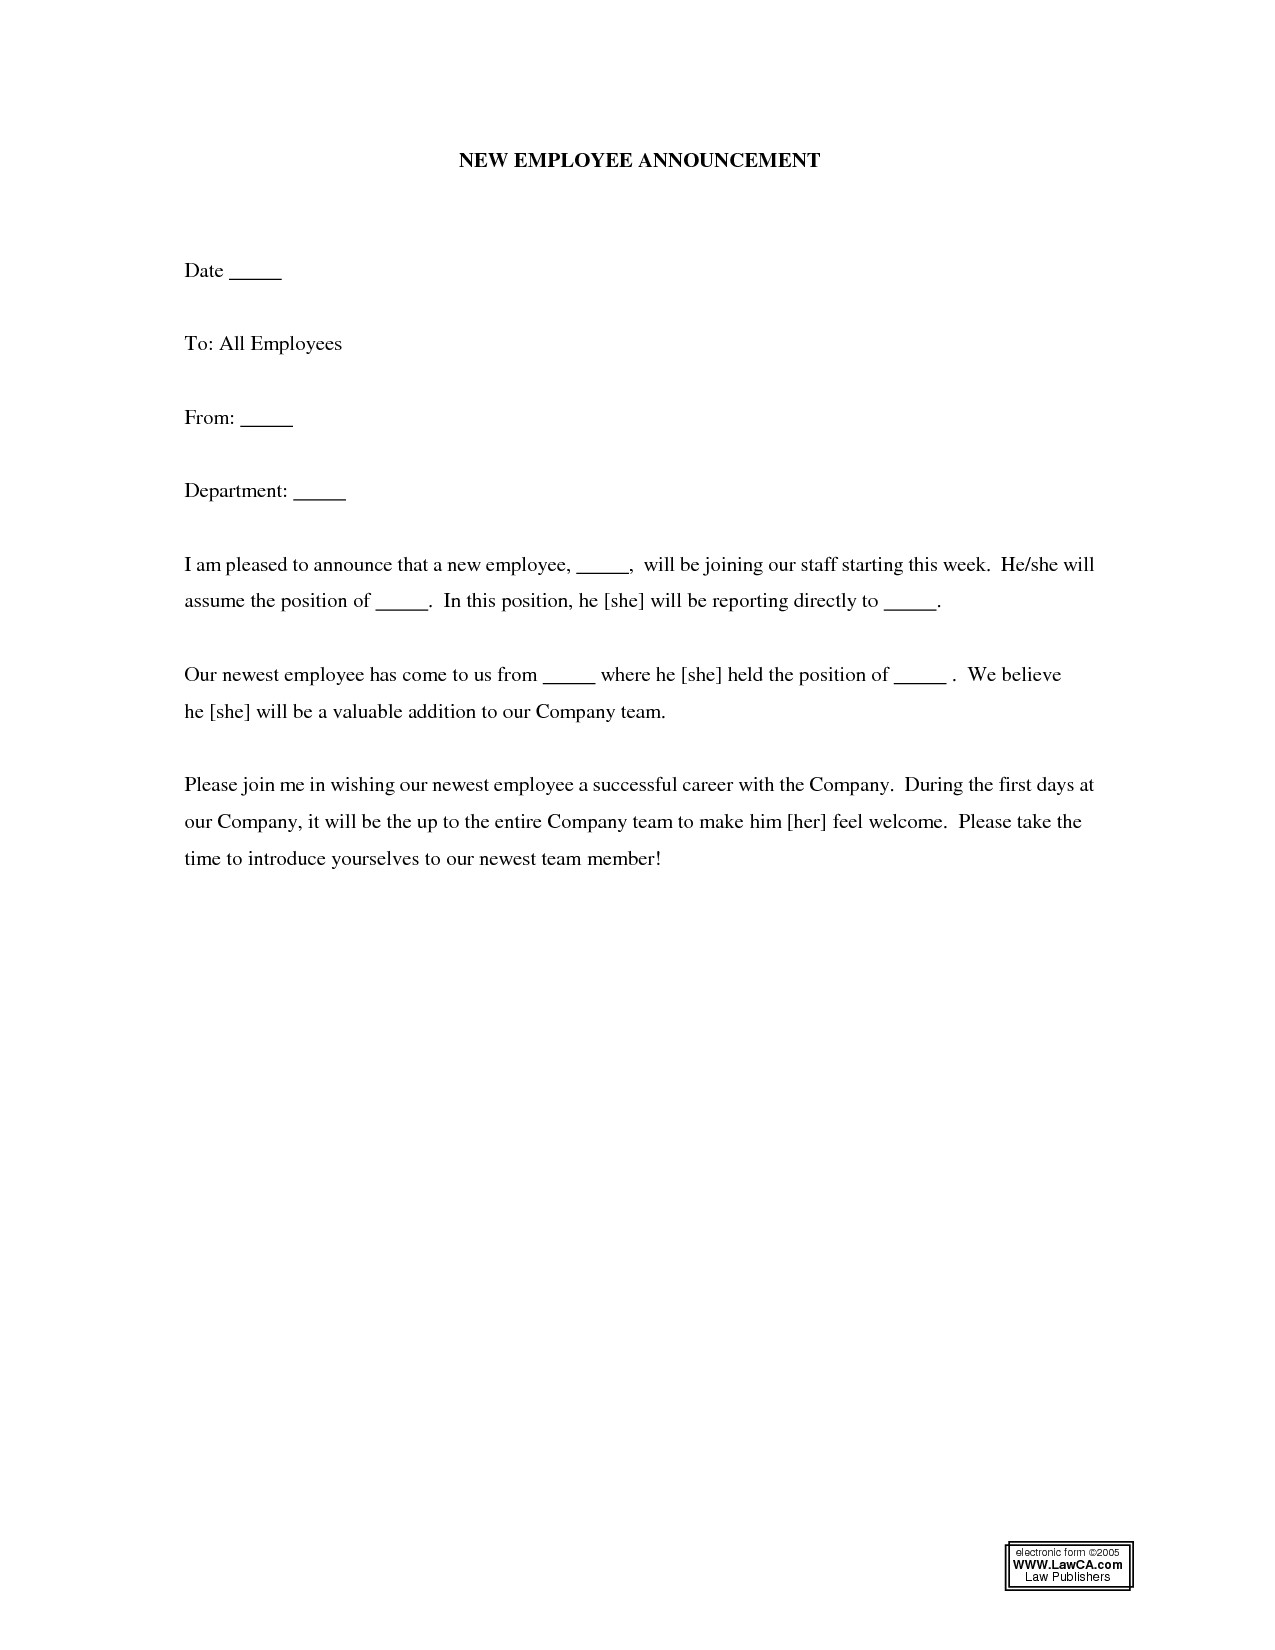 post new employee announcement letter 370390